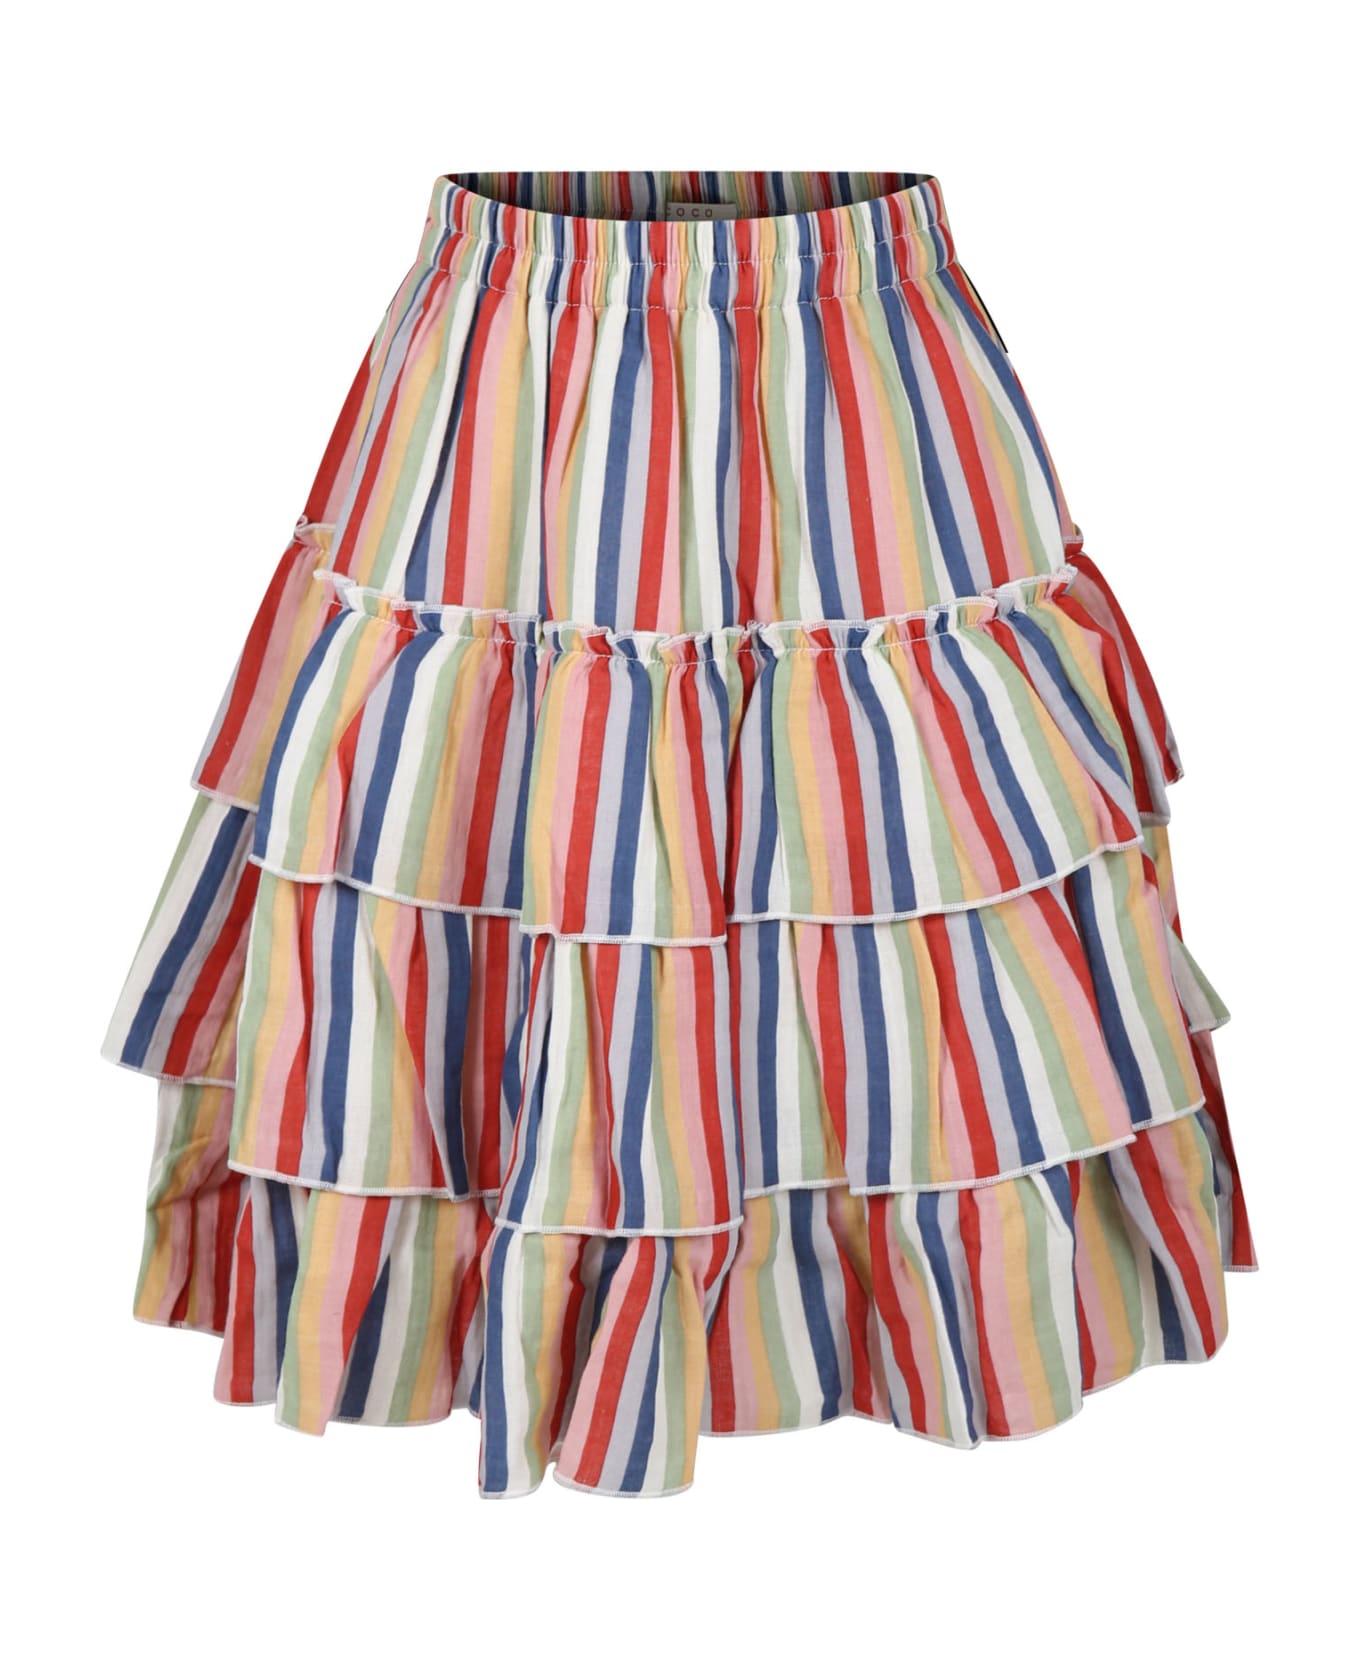 Coco Au Lait Multicolor Skirt For Girl With Stripes Pattern - Multicolor